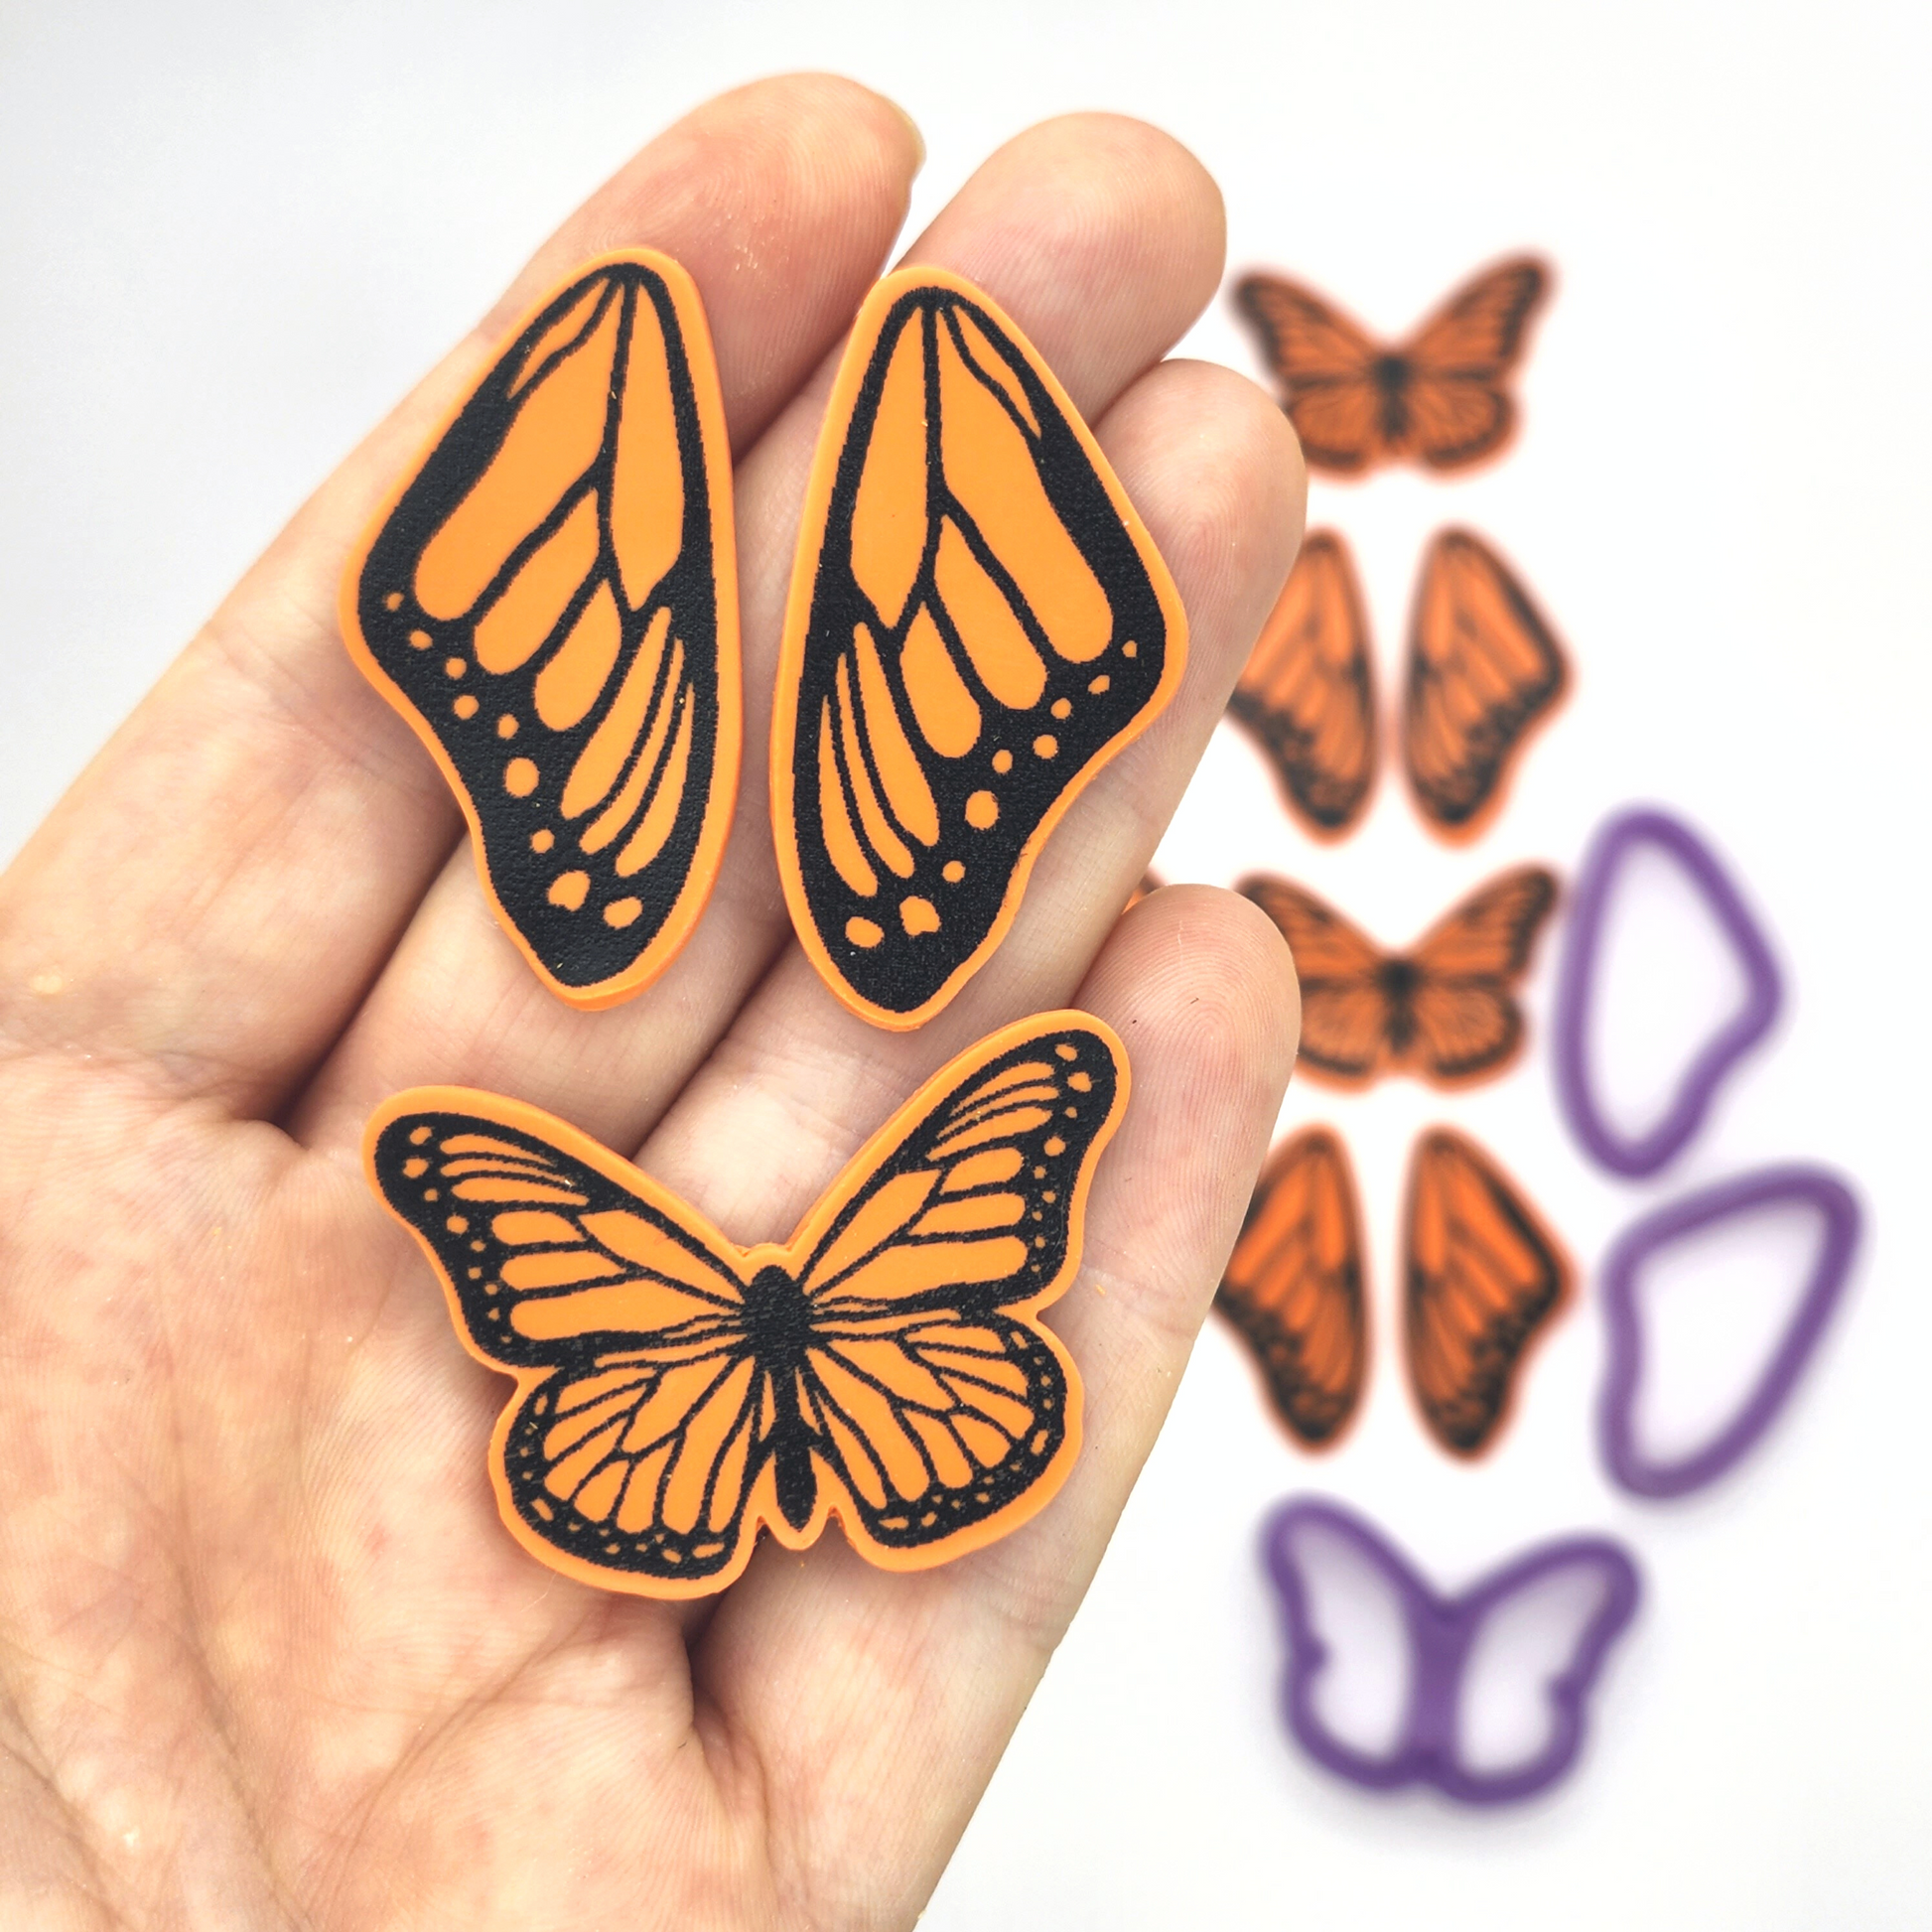 Sample finish product, monarch butterfly and butterfly wings painted and shape on polymer clay